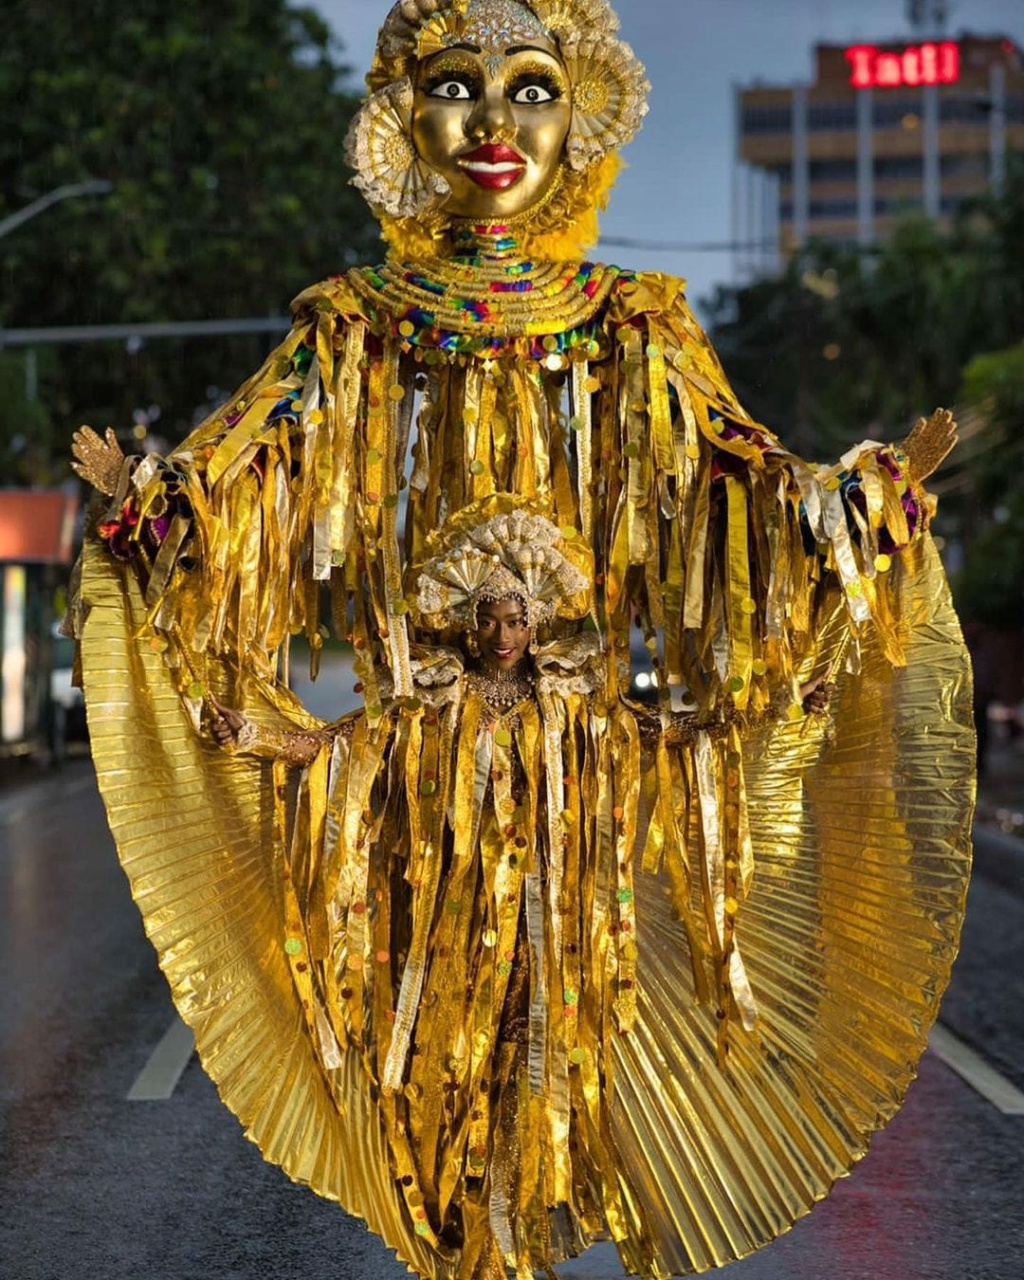  ♔ MISS UNIVERSE 2022 - NATIONAL COSTUME  ♔ - Page 2 32270810